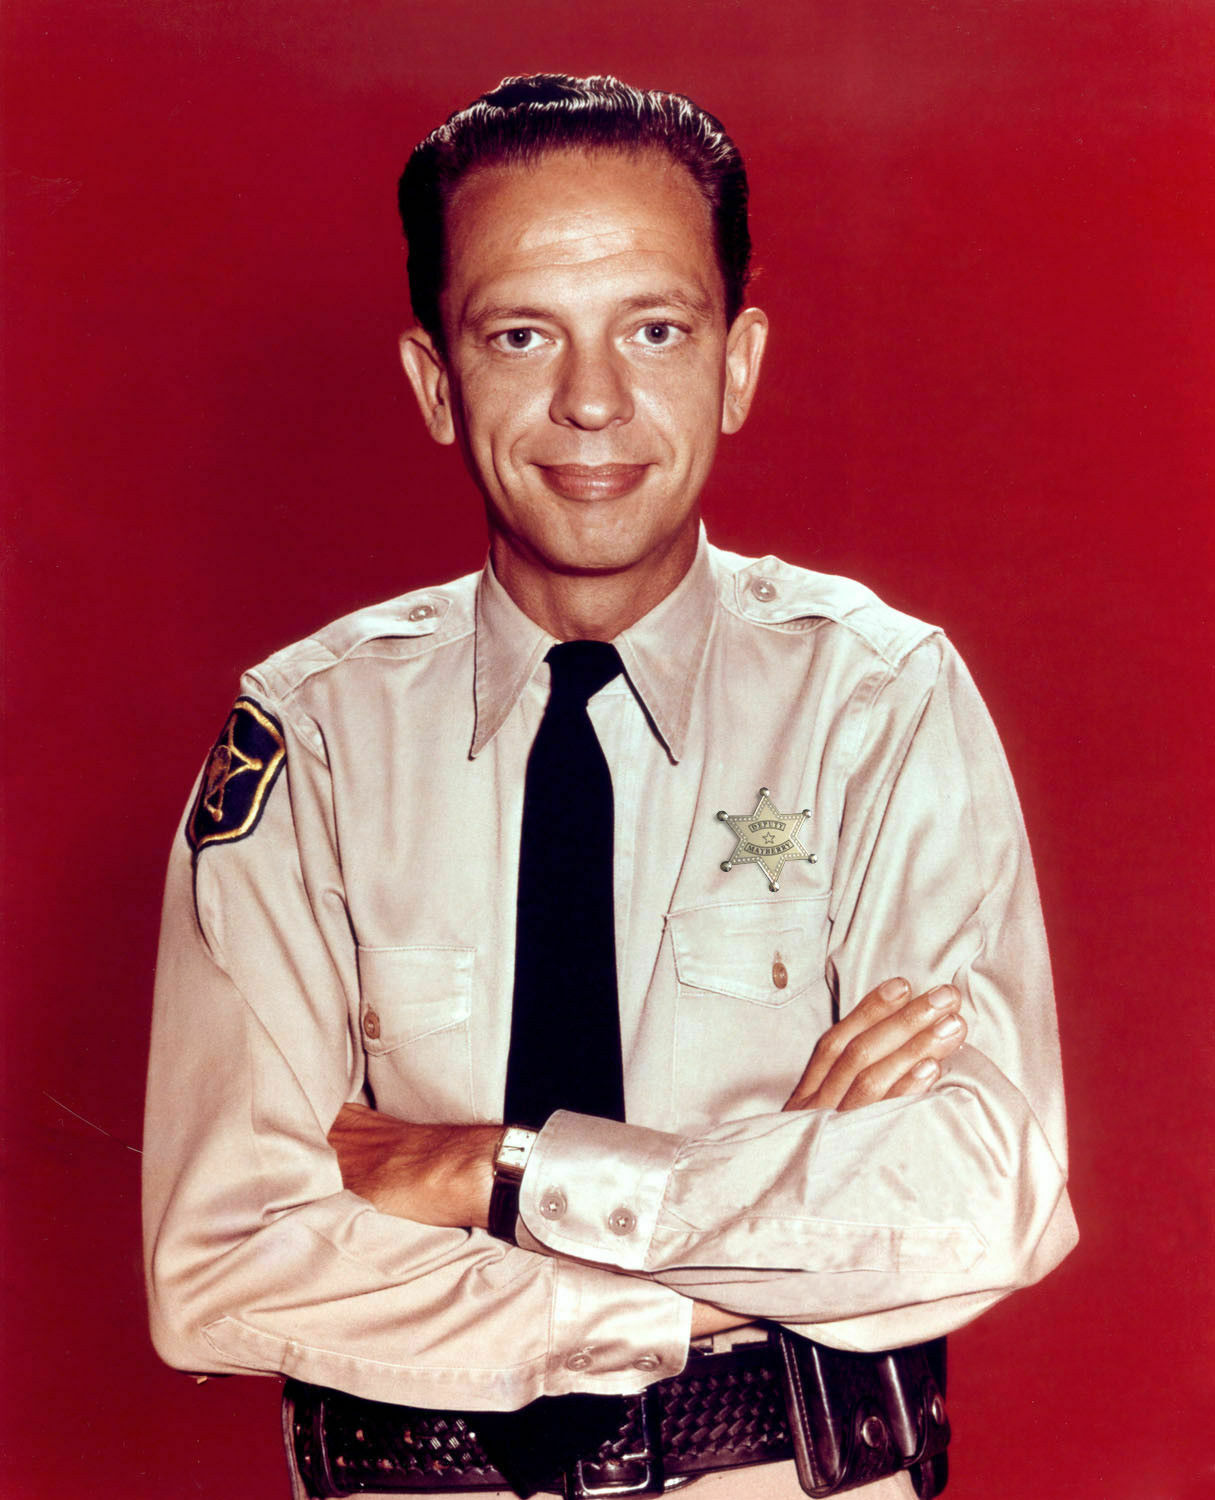 382090 Andy Griffith Show Don Knotts Barney Cast Wall Print Poster Us 11 86 Picclick